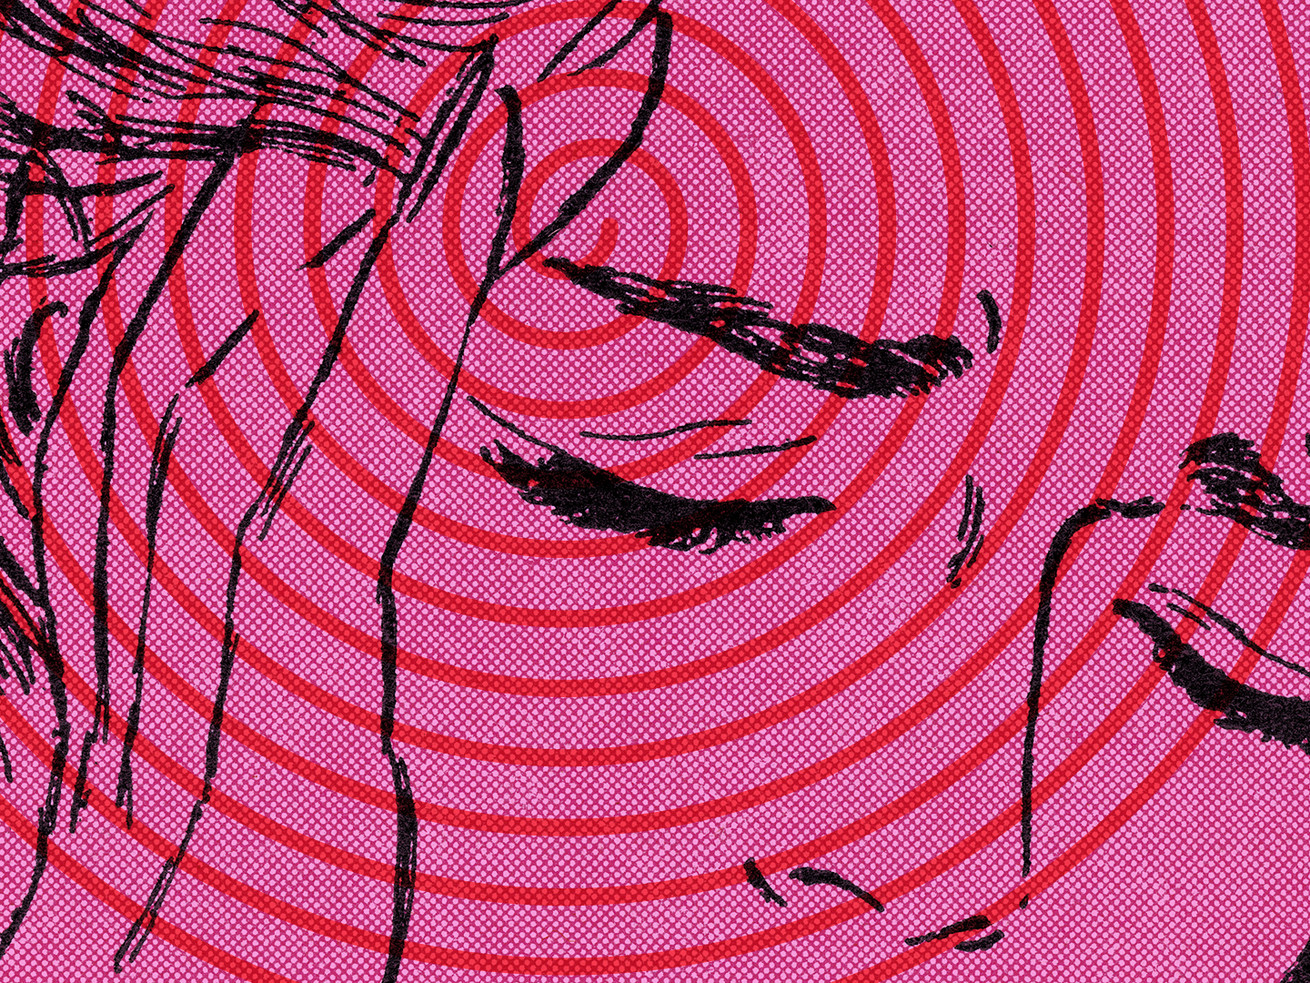 An illustration of a woman wincing in pain and holding her head. A red spiral is overlaid, originating from her temple.